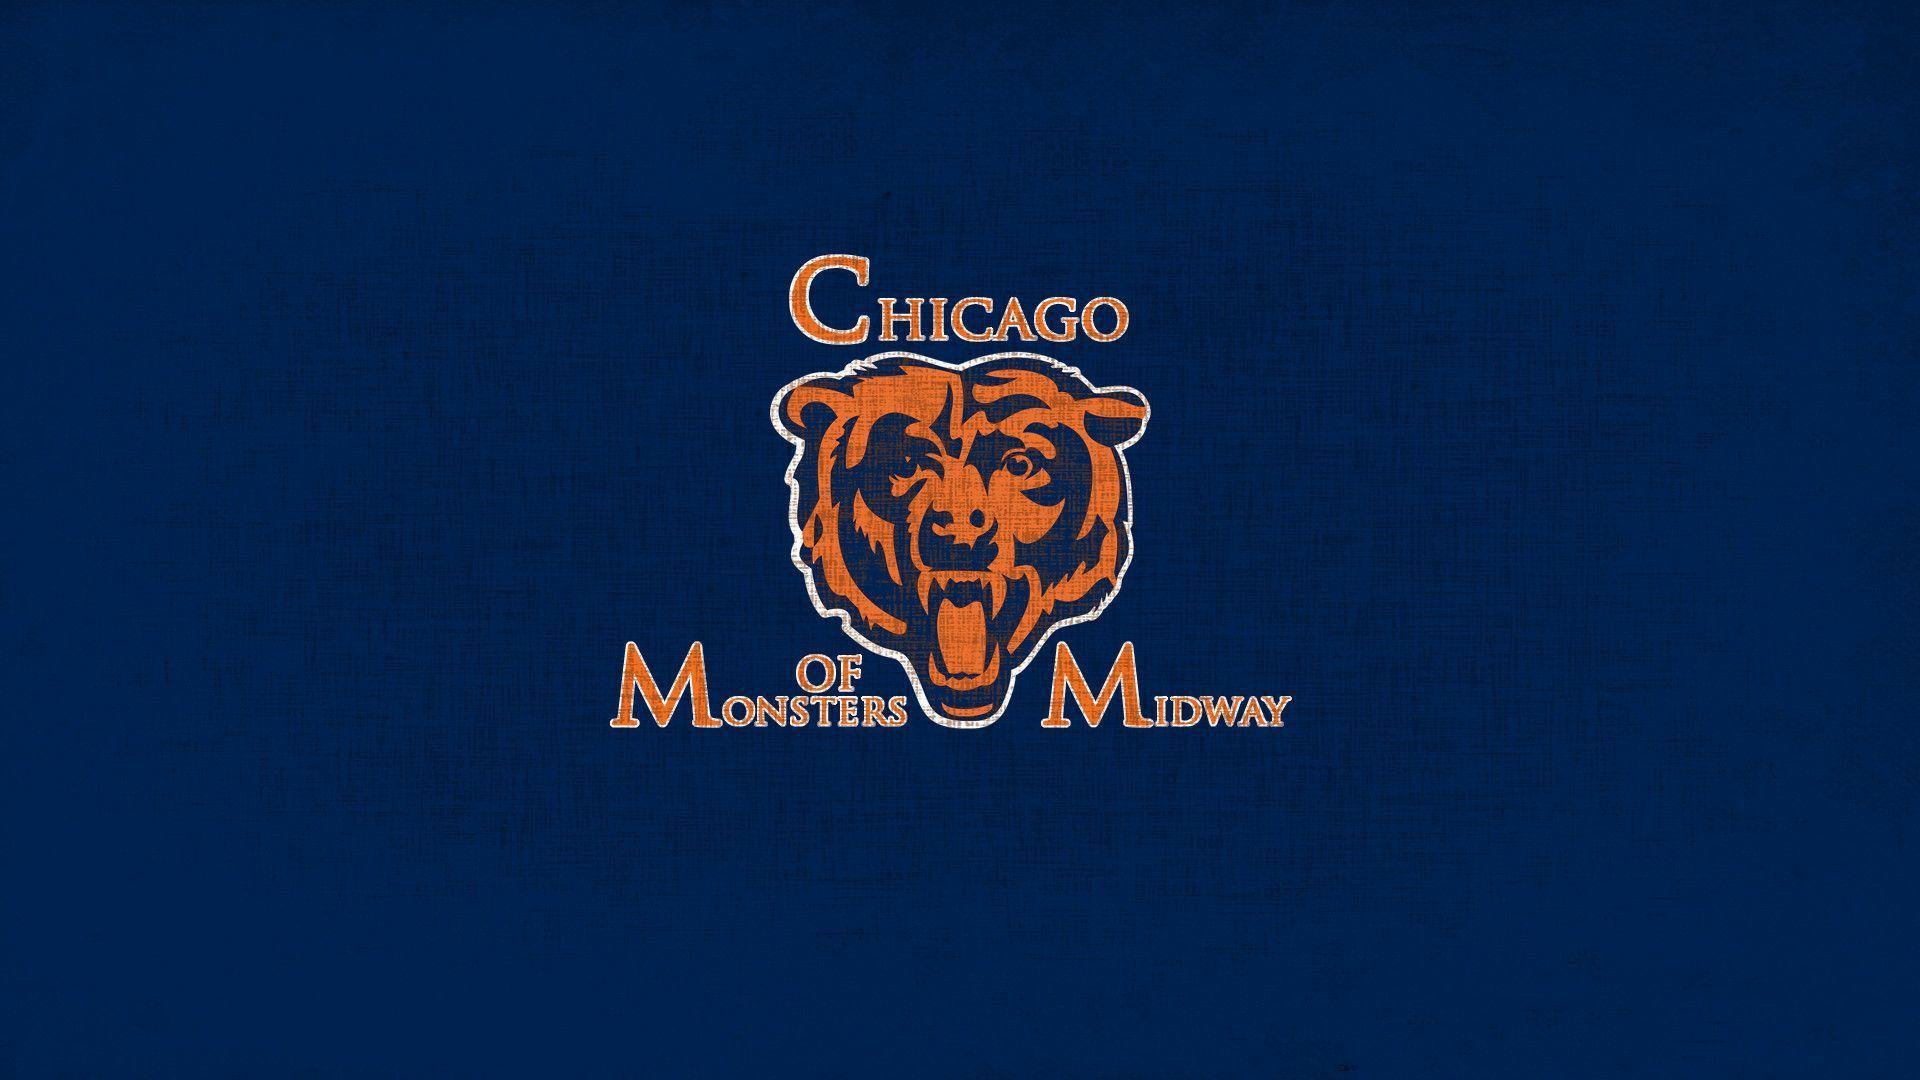 Free Download Creative Chicago Bear Image